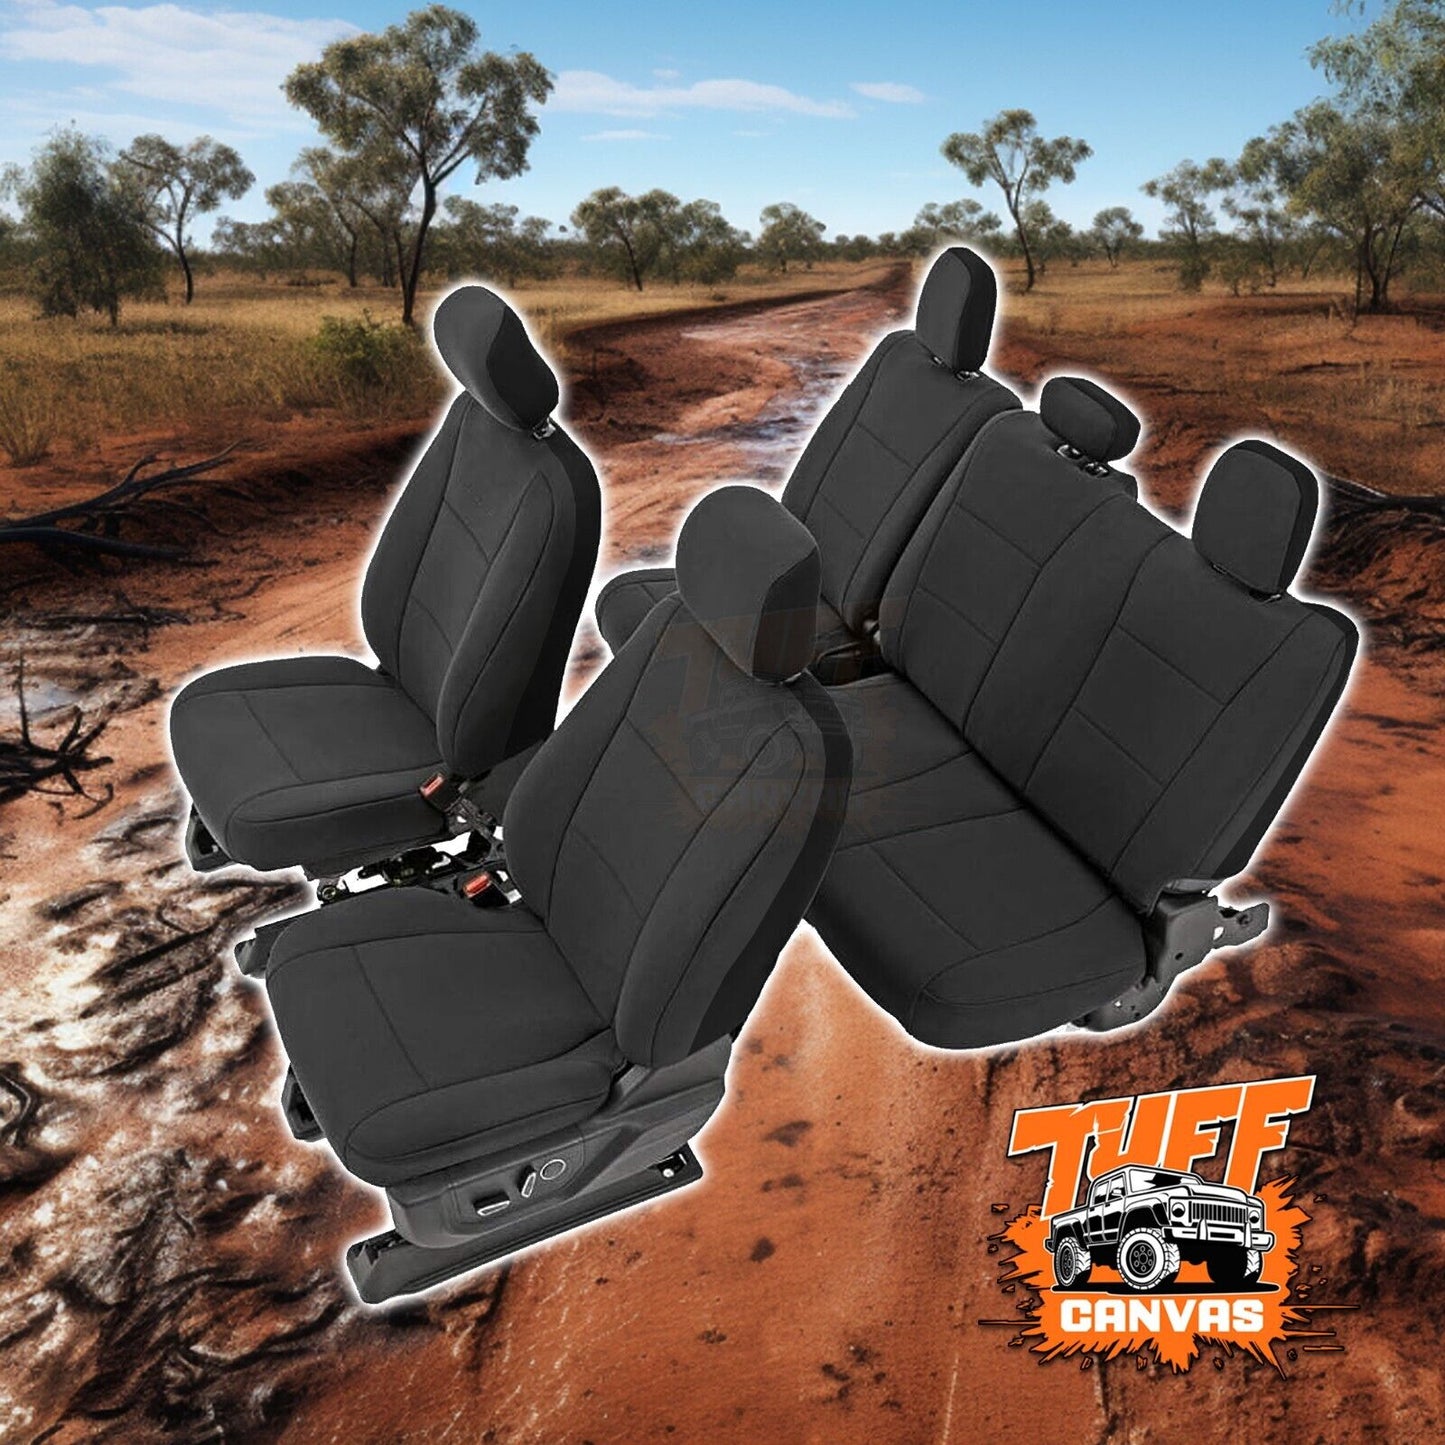 Charcoal Tuff Canvas S2 Seat Covers 2 Rows For Nissan Navara D40 ST ST-X 10/2007-10/2015